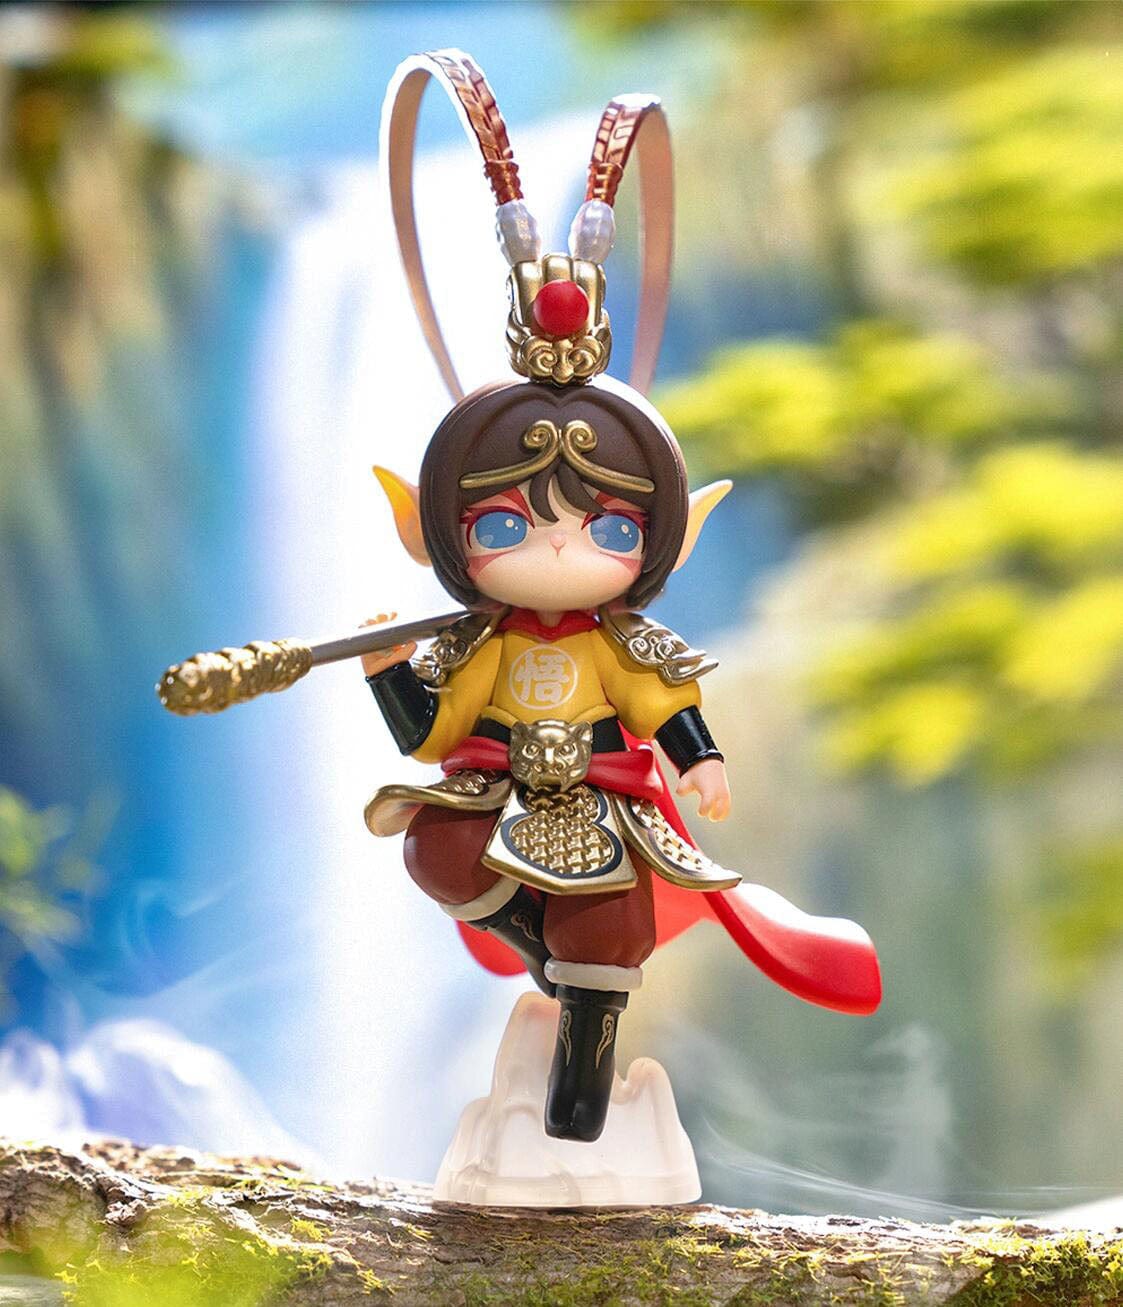 SURI Journey to The West Series Blind Box